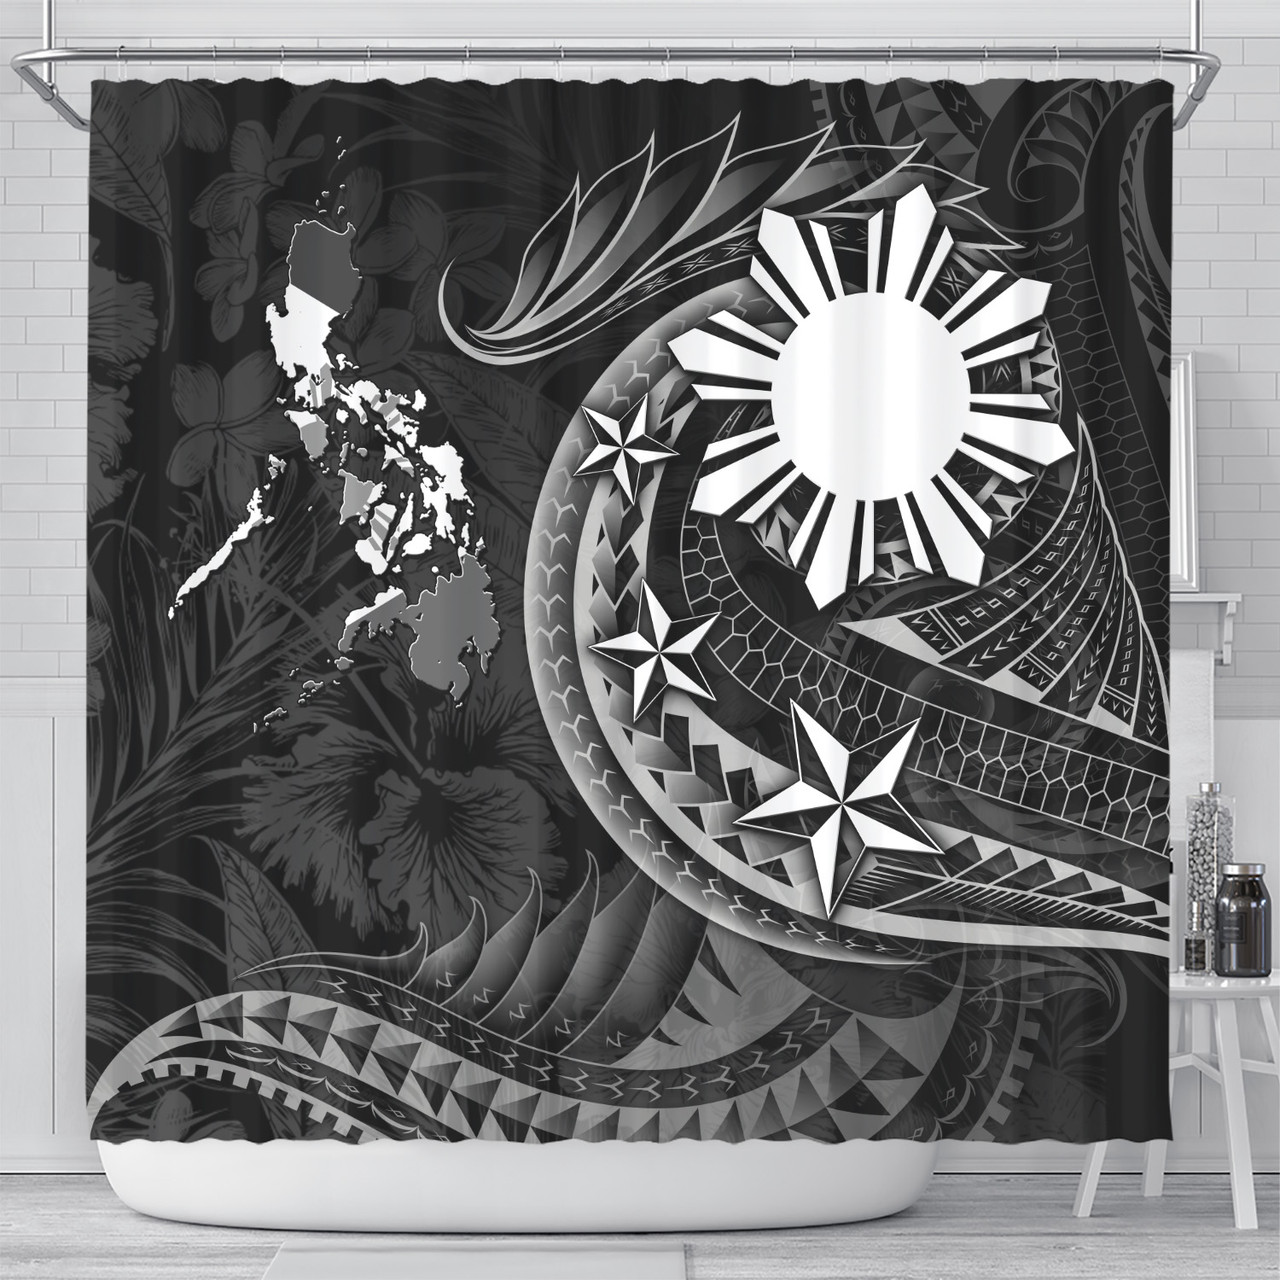 Philippines Filipinos Shower Curtain Philippines Sun Tribal Patterns Tropical Flowers Curve Style